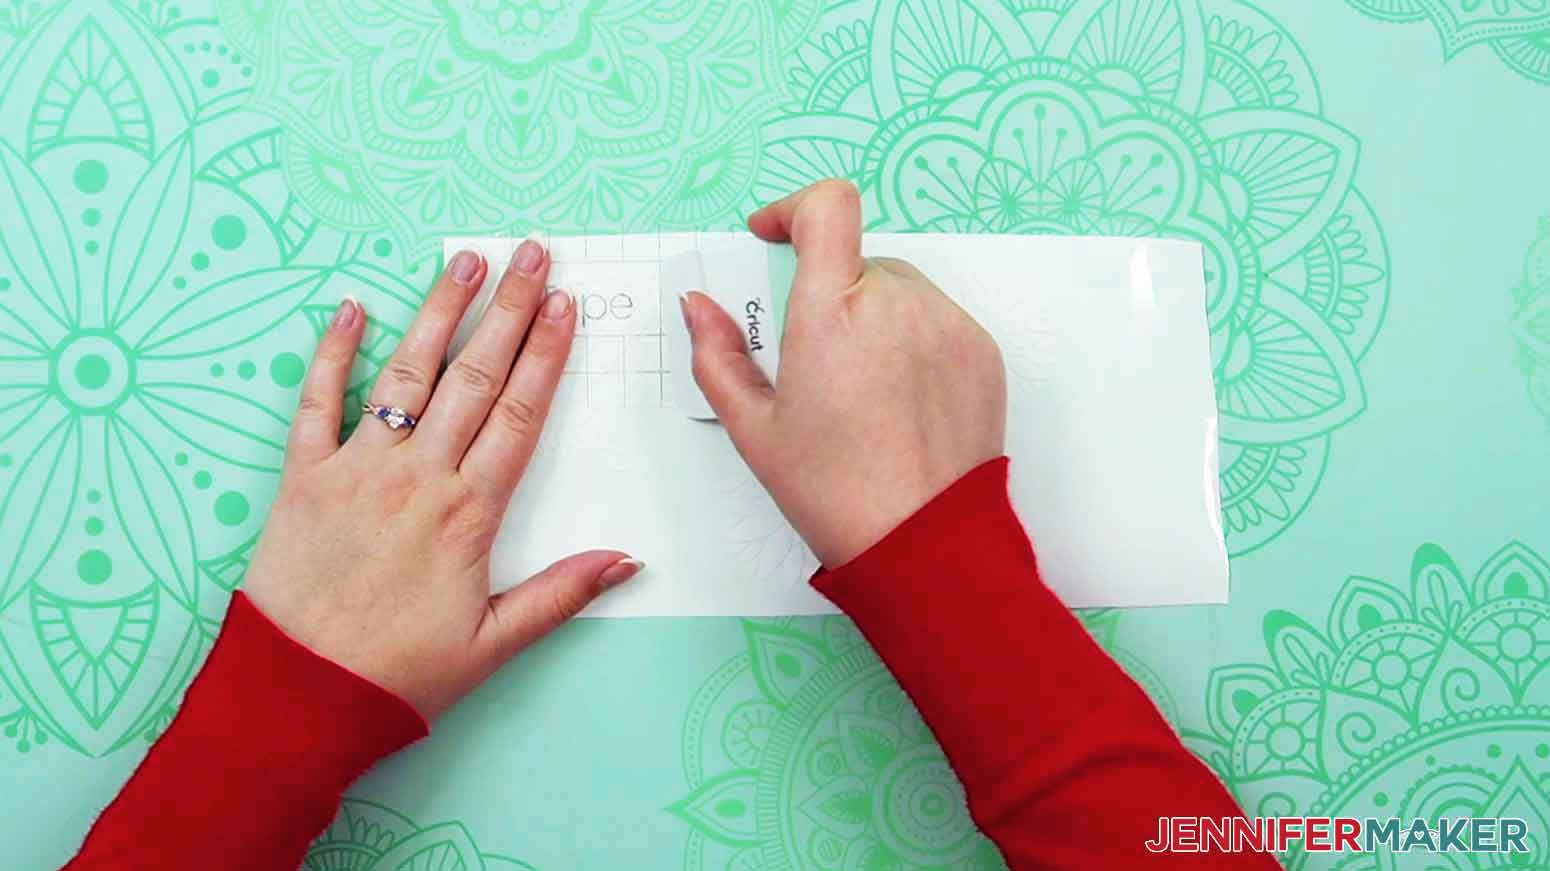 Use a scraper tool to burnish the transfer tape the the white permanent vinyl dahlia decal.